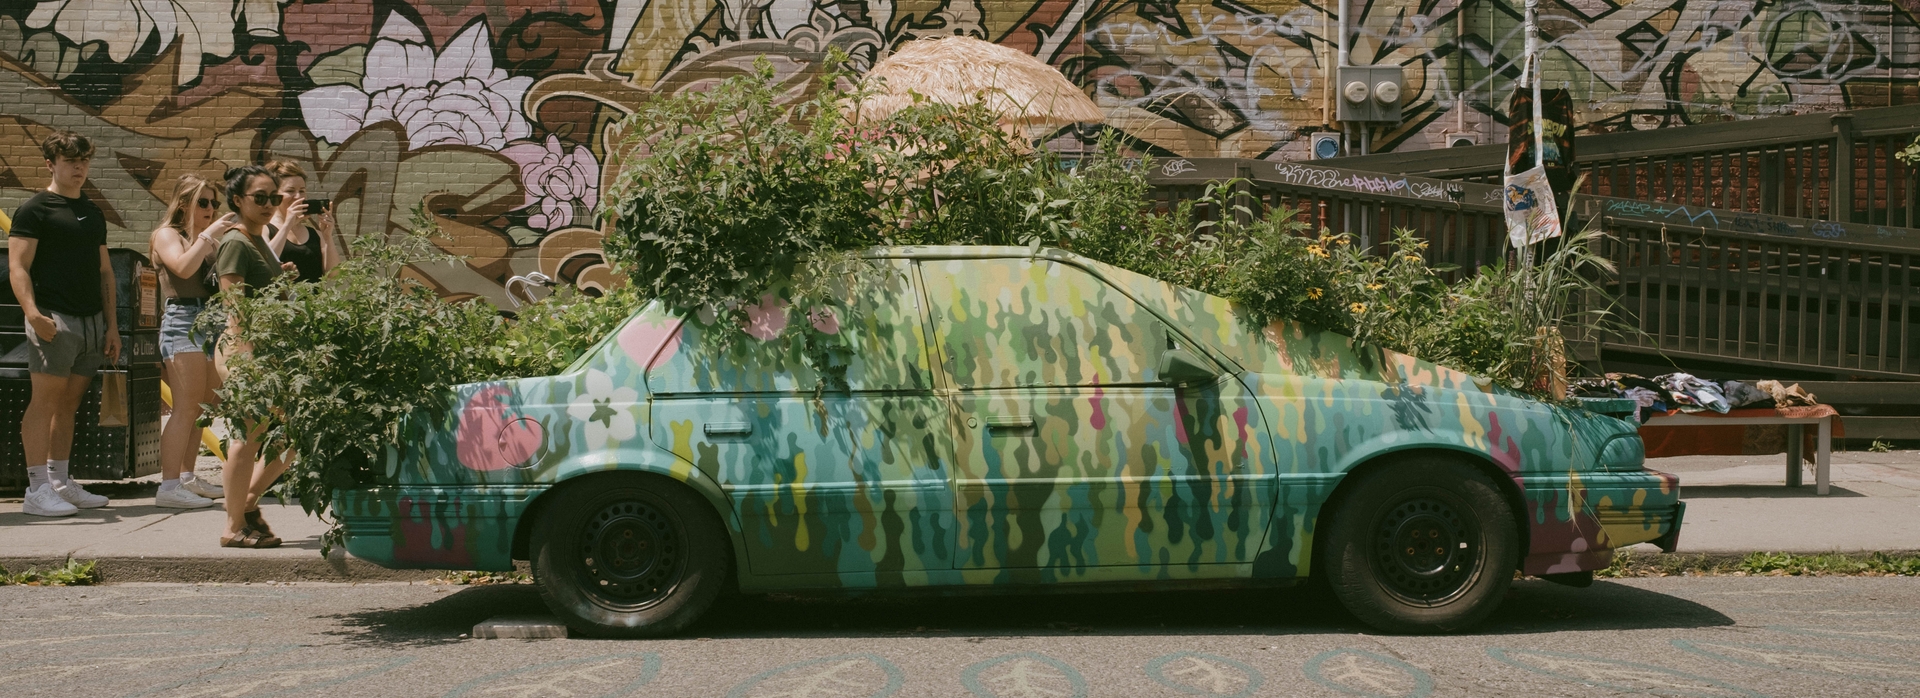 Heavily-painted car with plants growing out of every part of it. There are some onlookers behind it, and the word "Kensington" painted on the street.